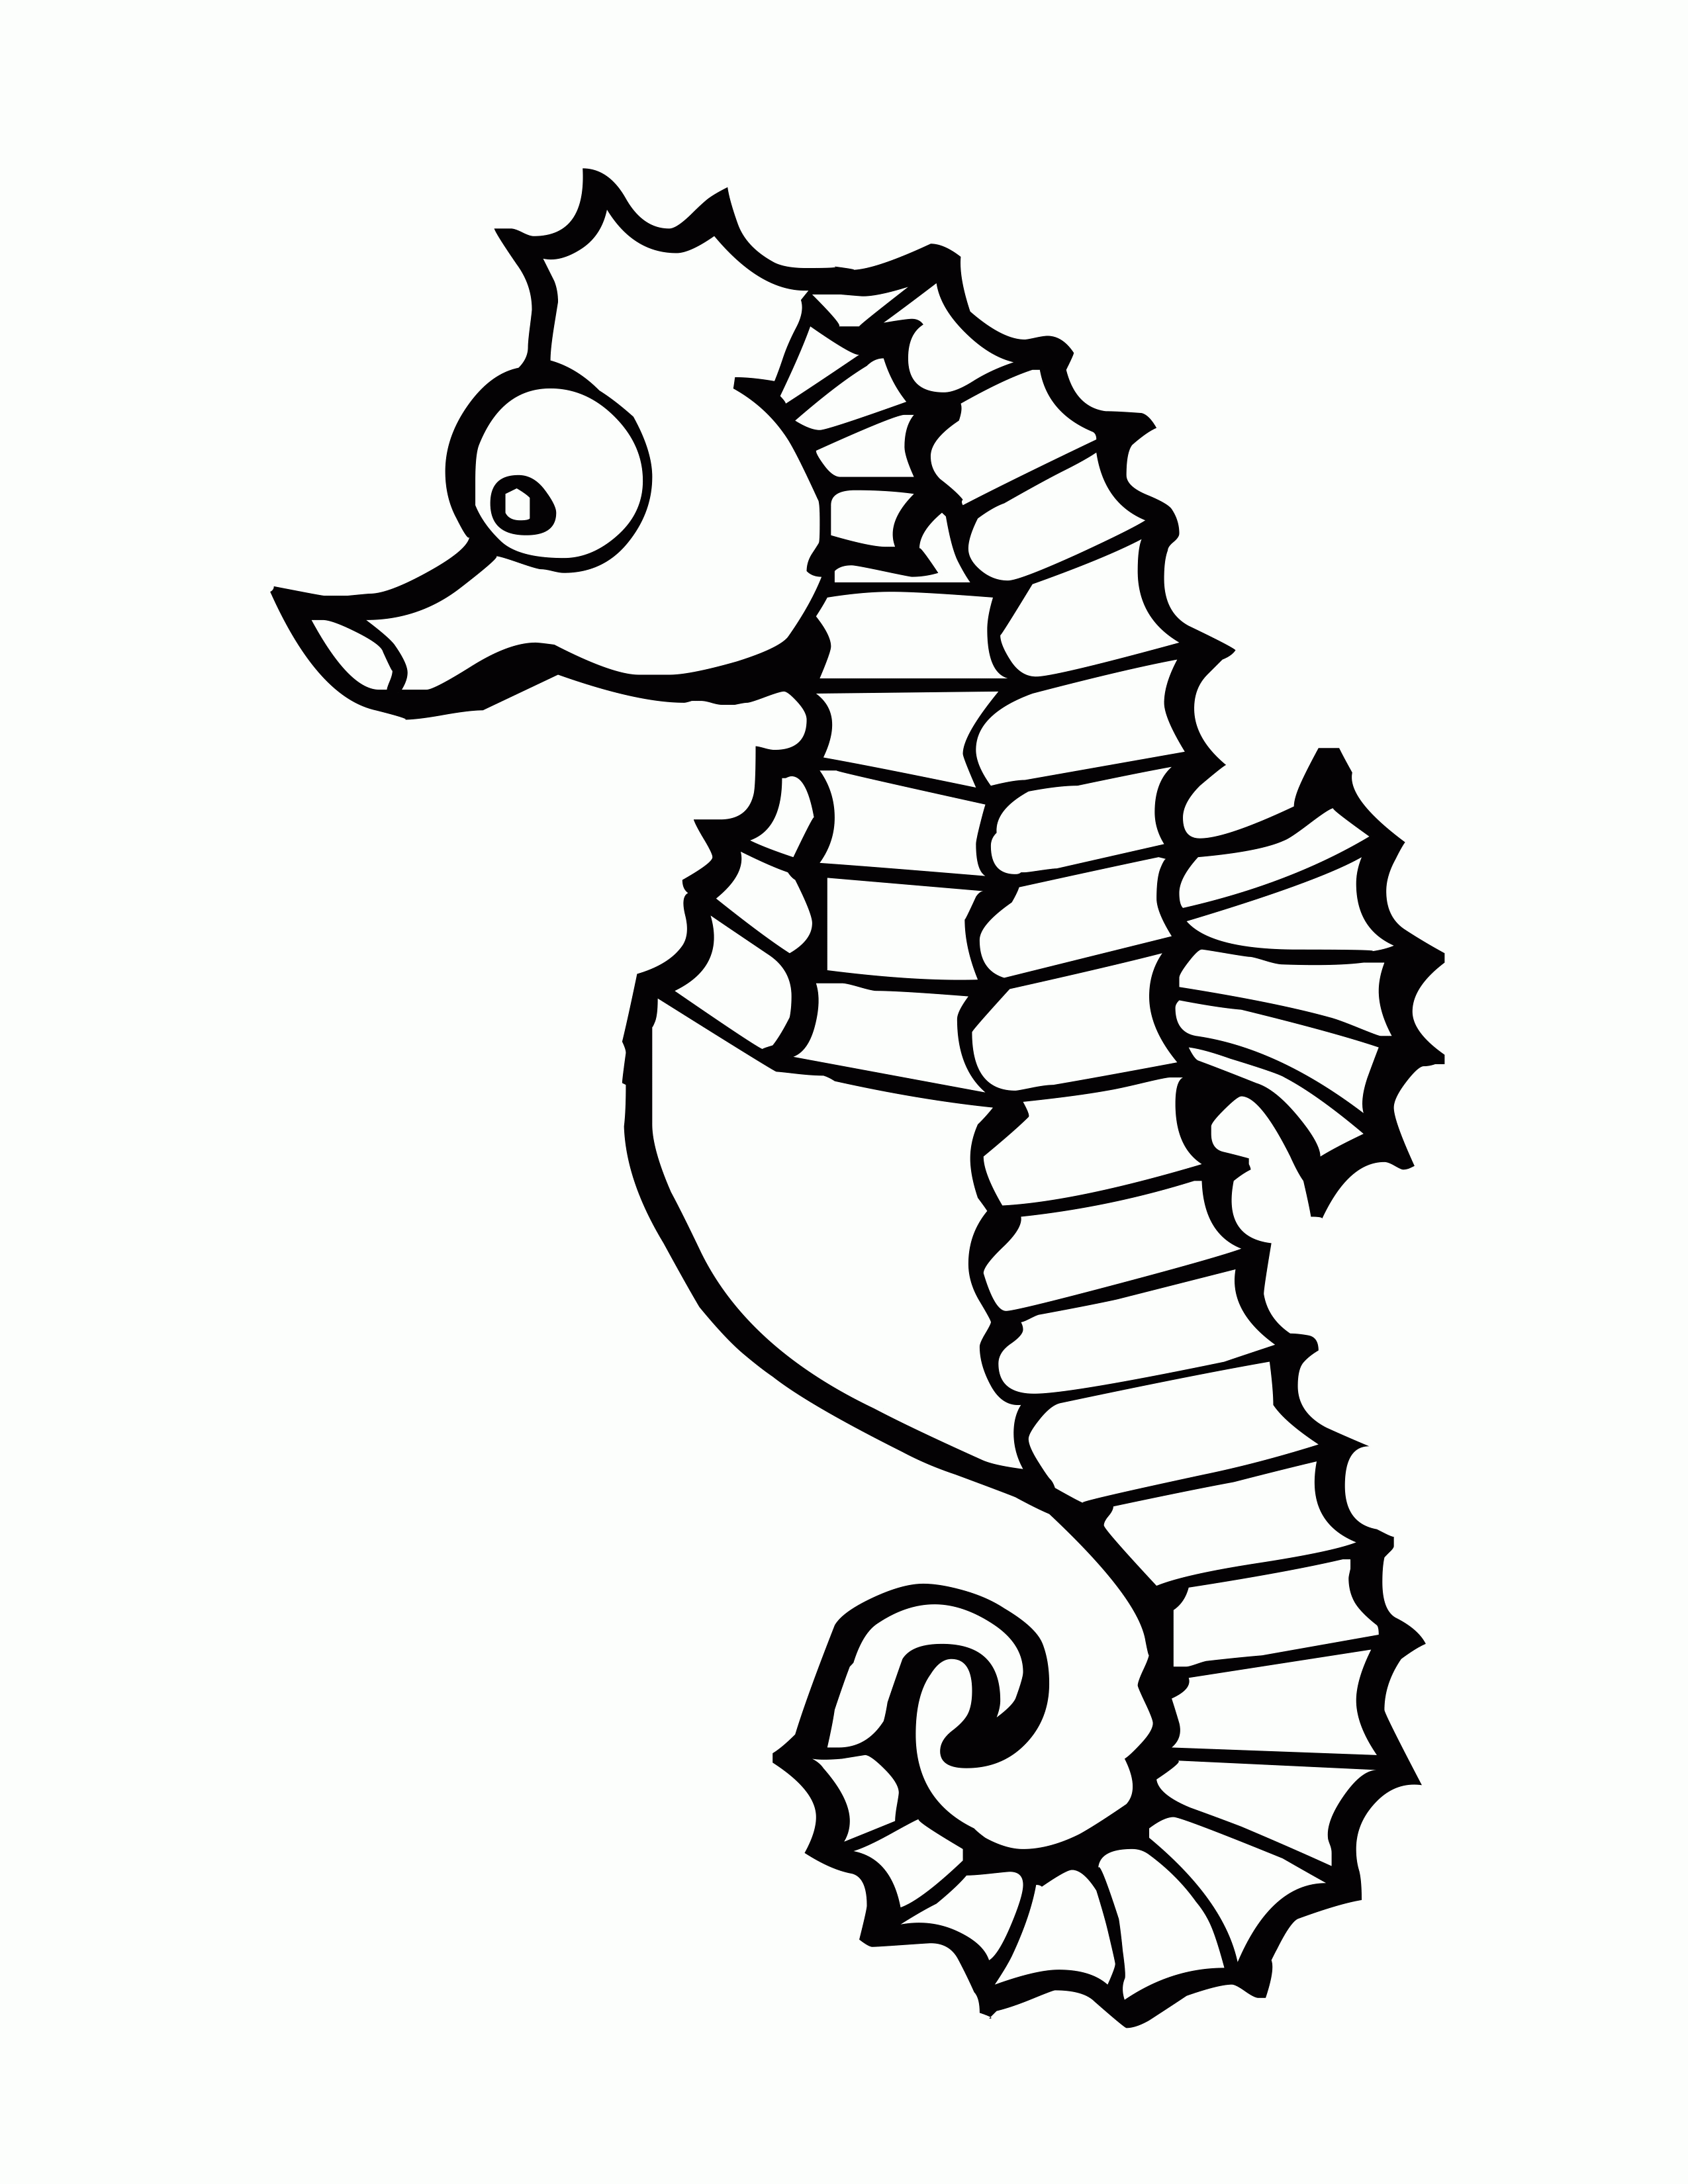 35 Sheet of Animal Coloring Pages for Free - VoteForVerde.com